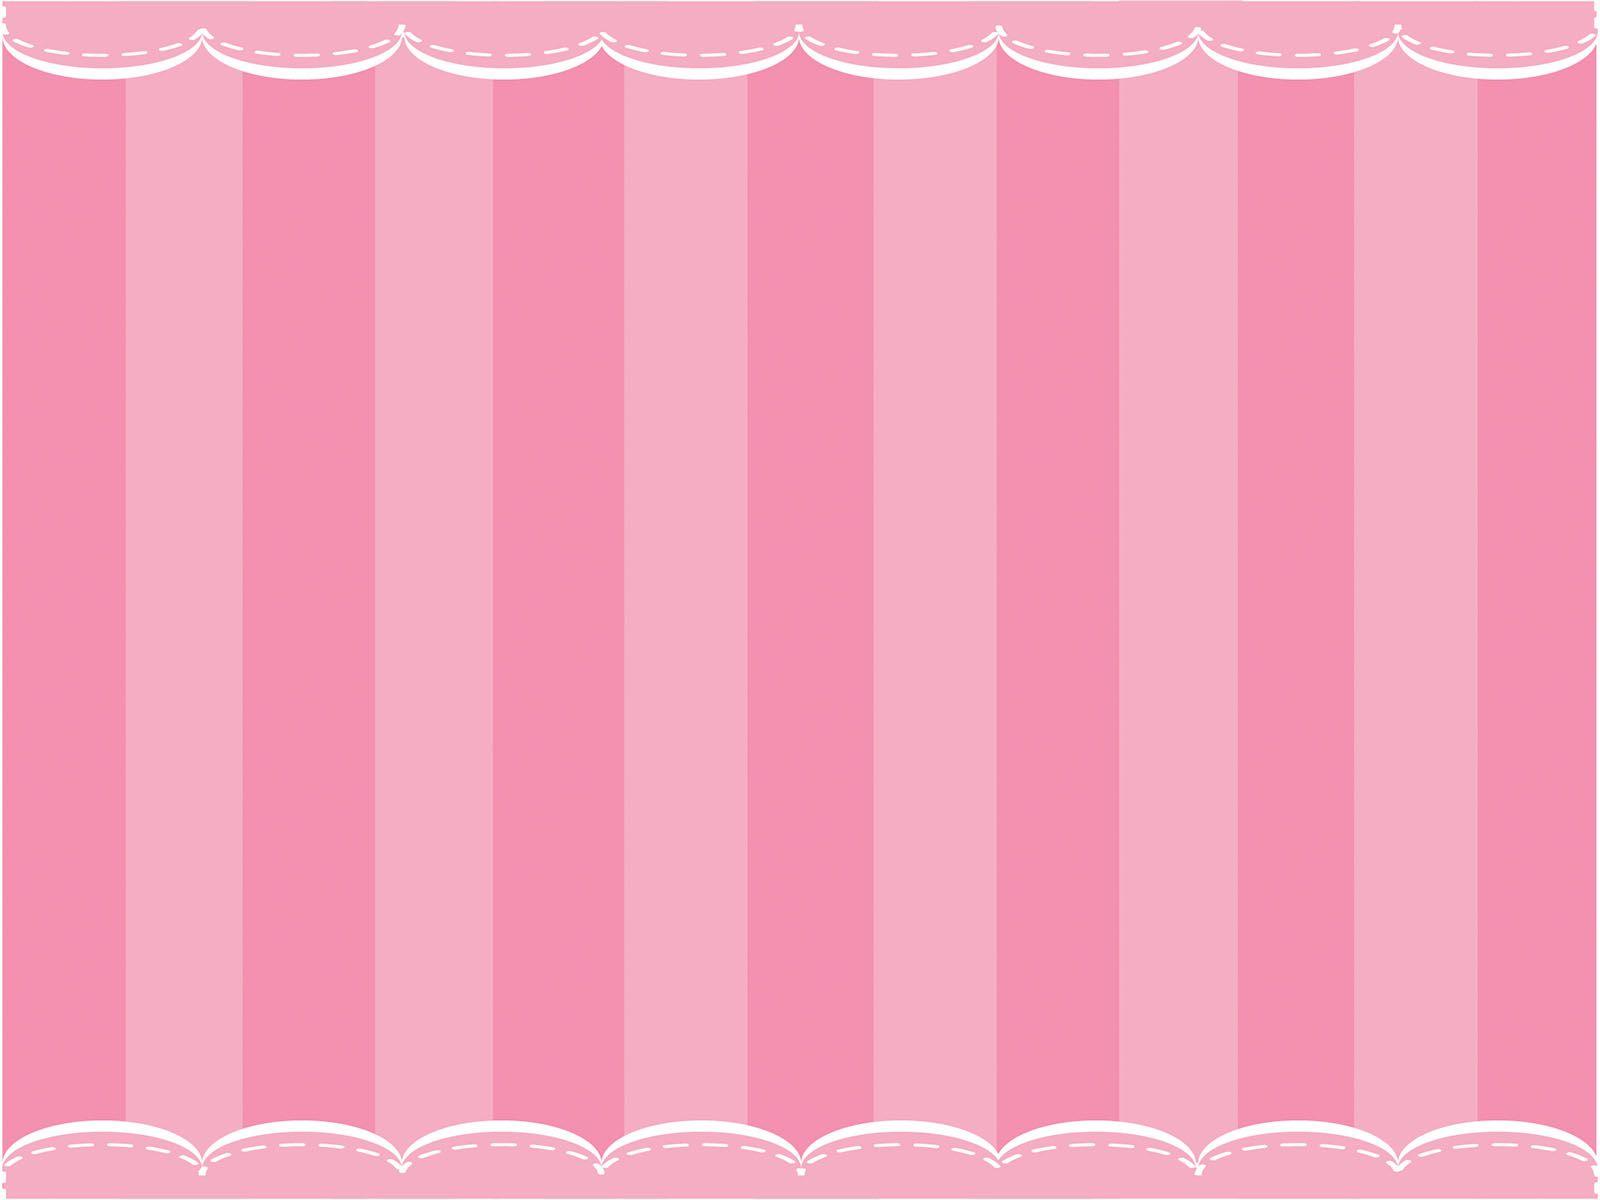 Cute Pink Curtain Powerpoint PPT